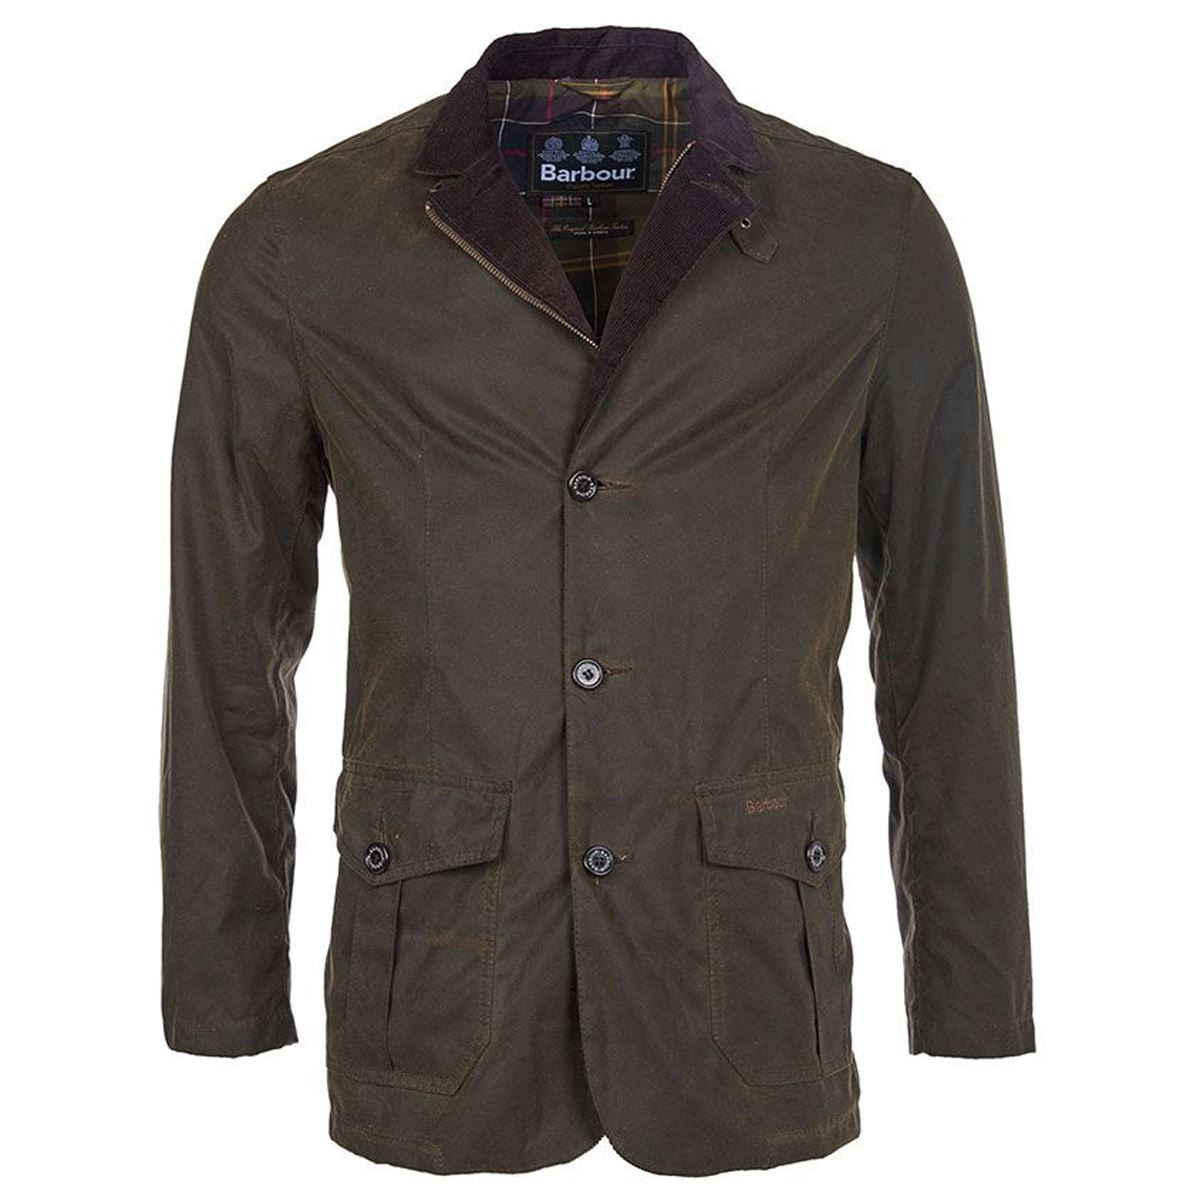 What is the composition of the Barbour Lutz Wax Jacket?